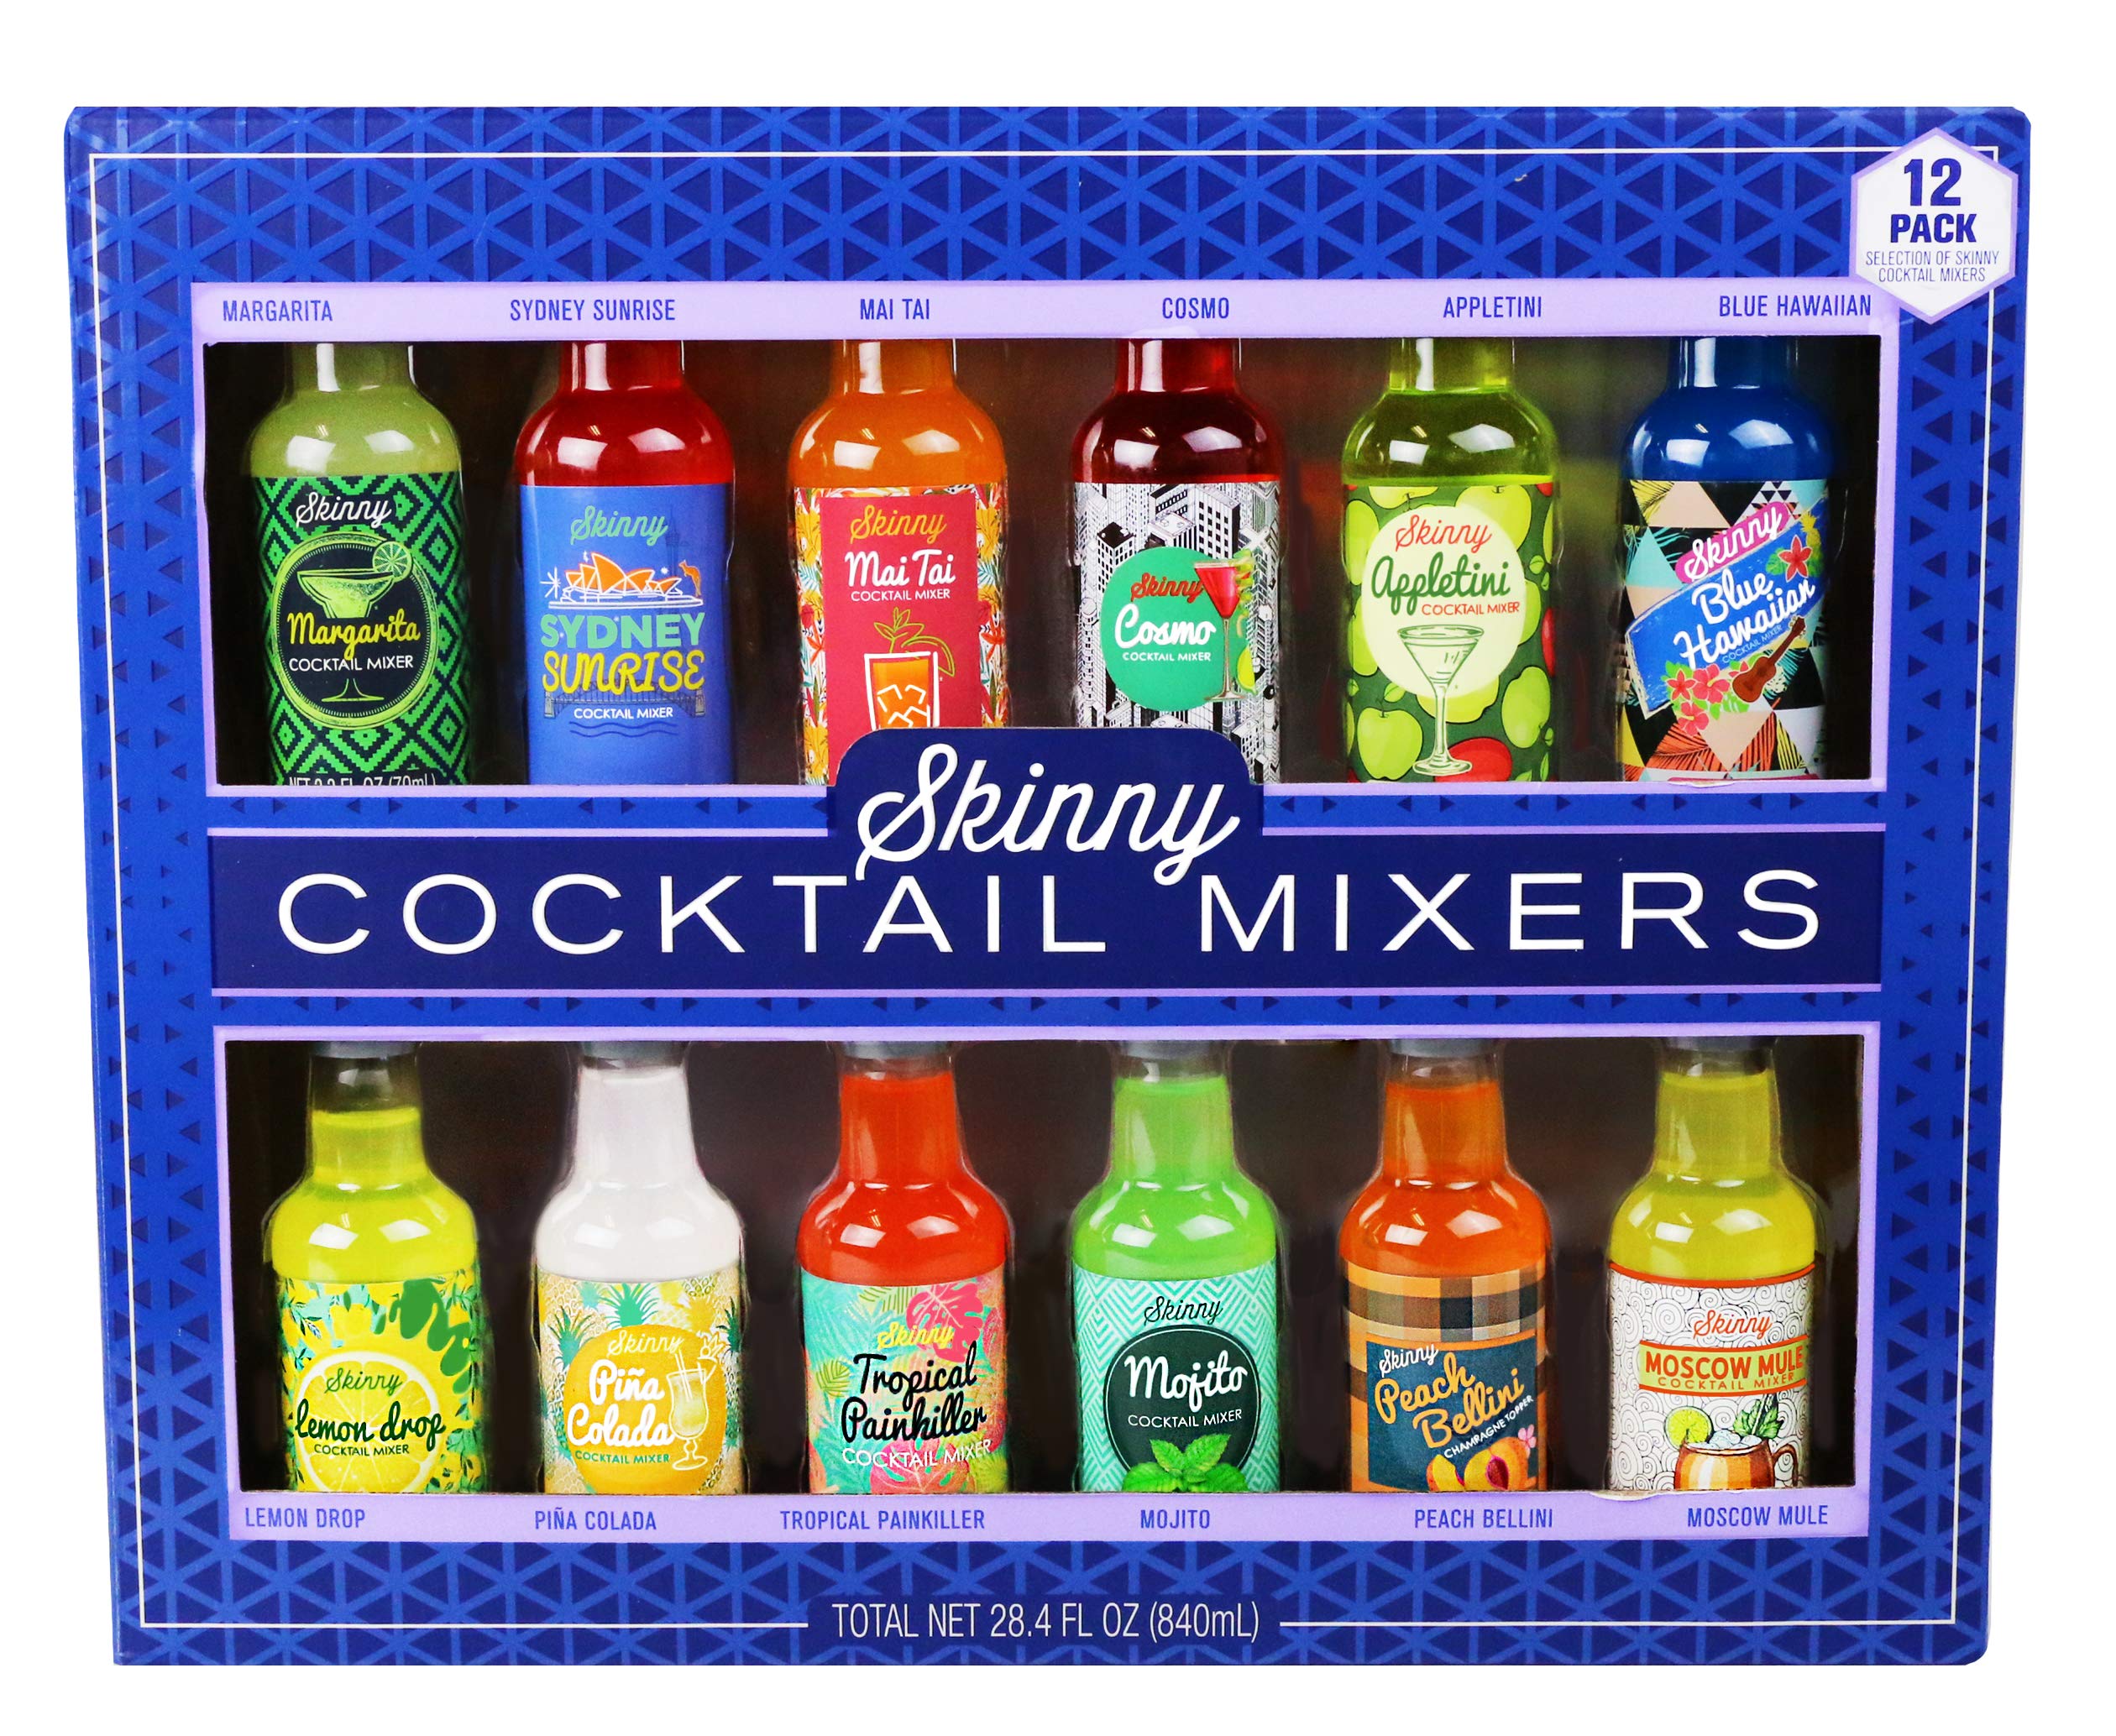 Thoughtfully Cocktails, Mix and Match Mini Sampler Cocktail Mixer Set,  Vegan and Vegetarian, Tropical and Classic, Set of 20 (Contains NO Alcohol)